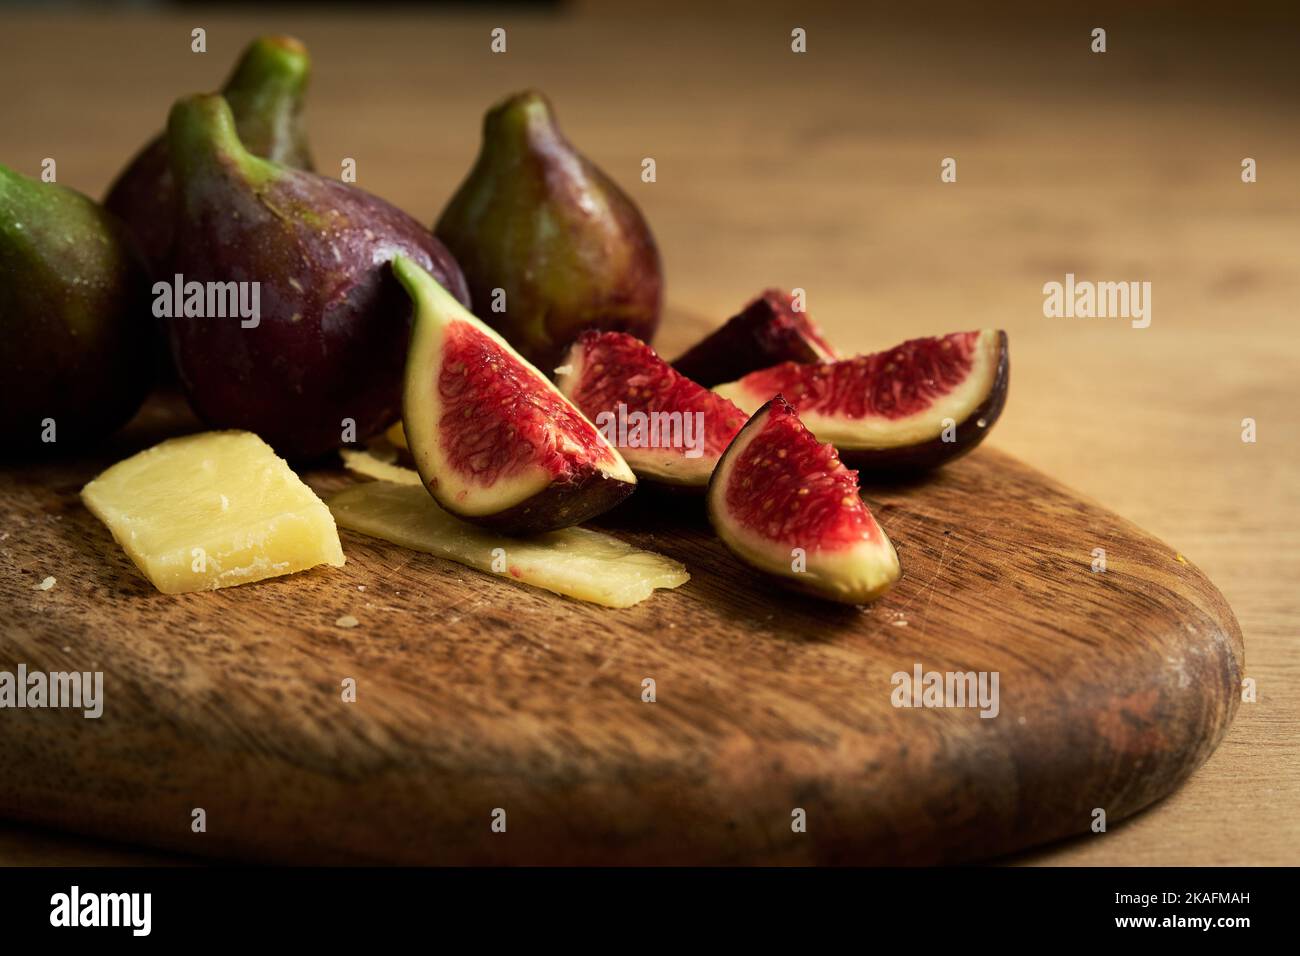 sliced figs on a wooden board Stock Photo